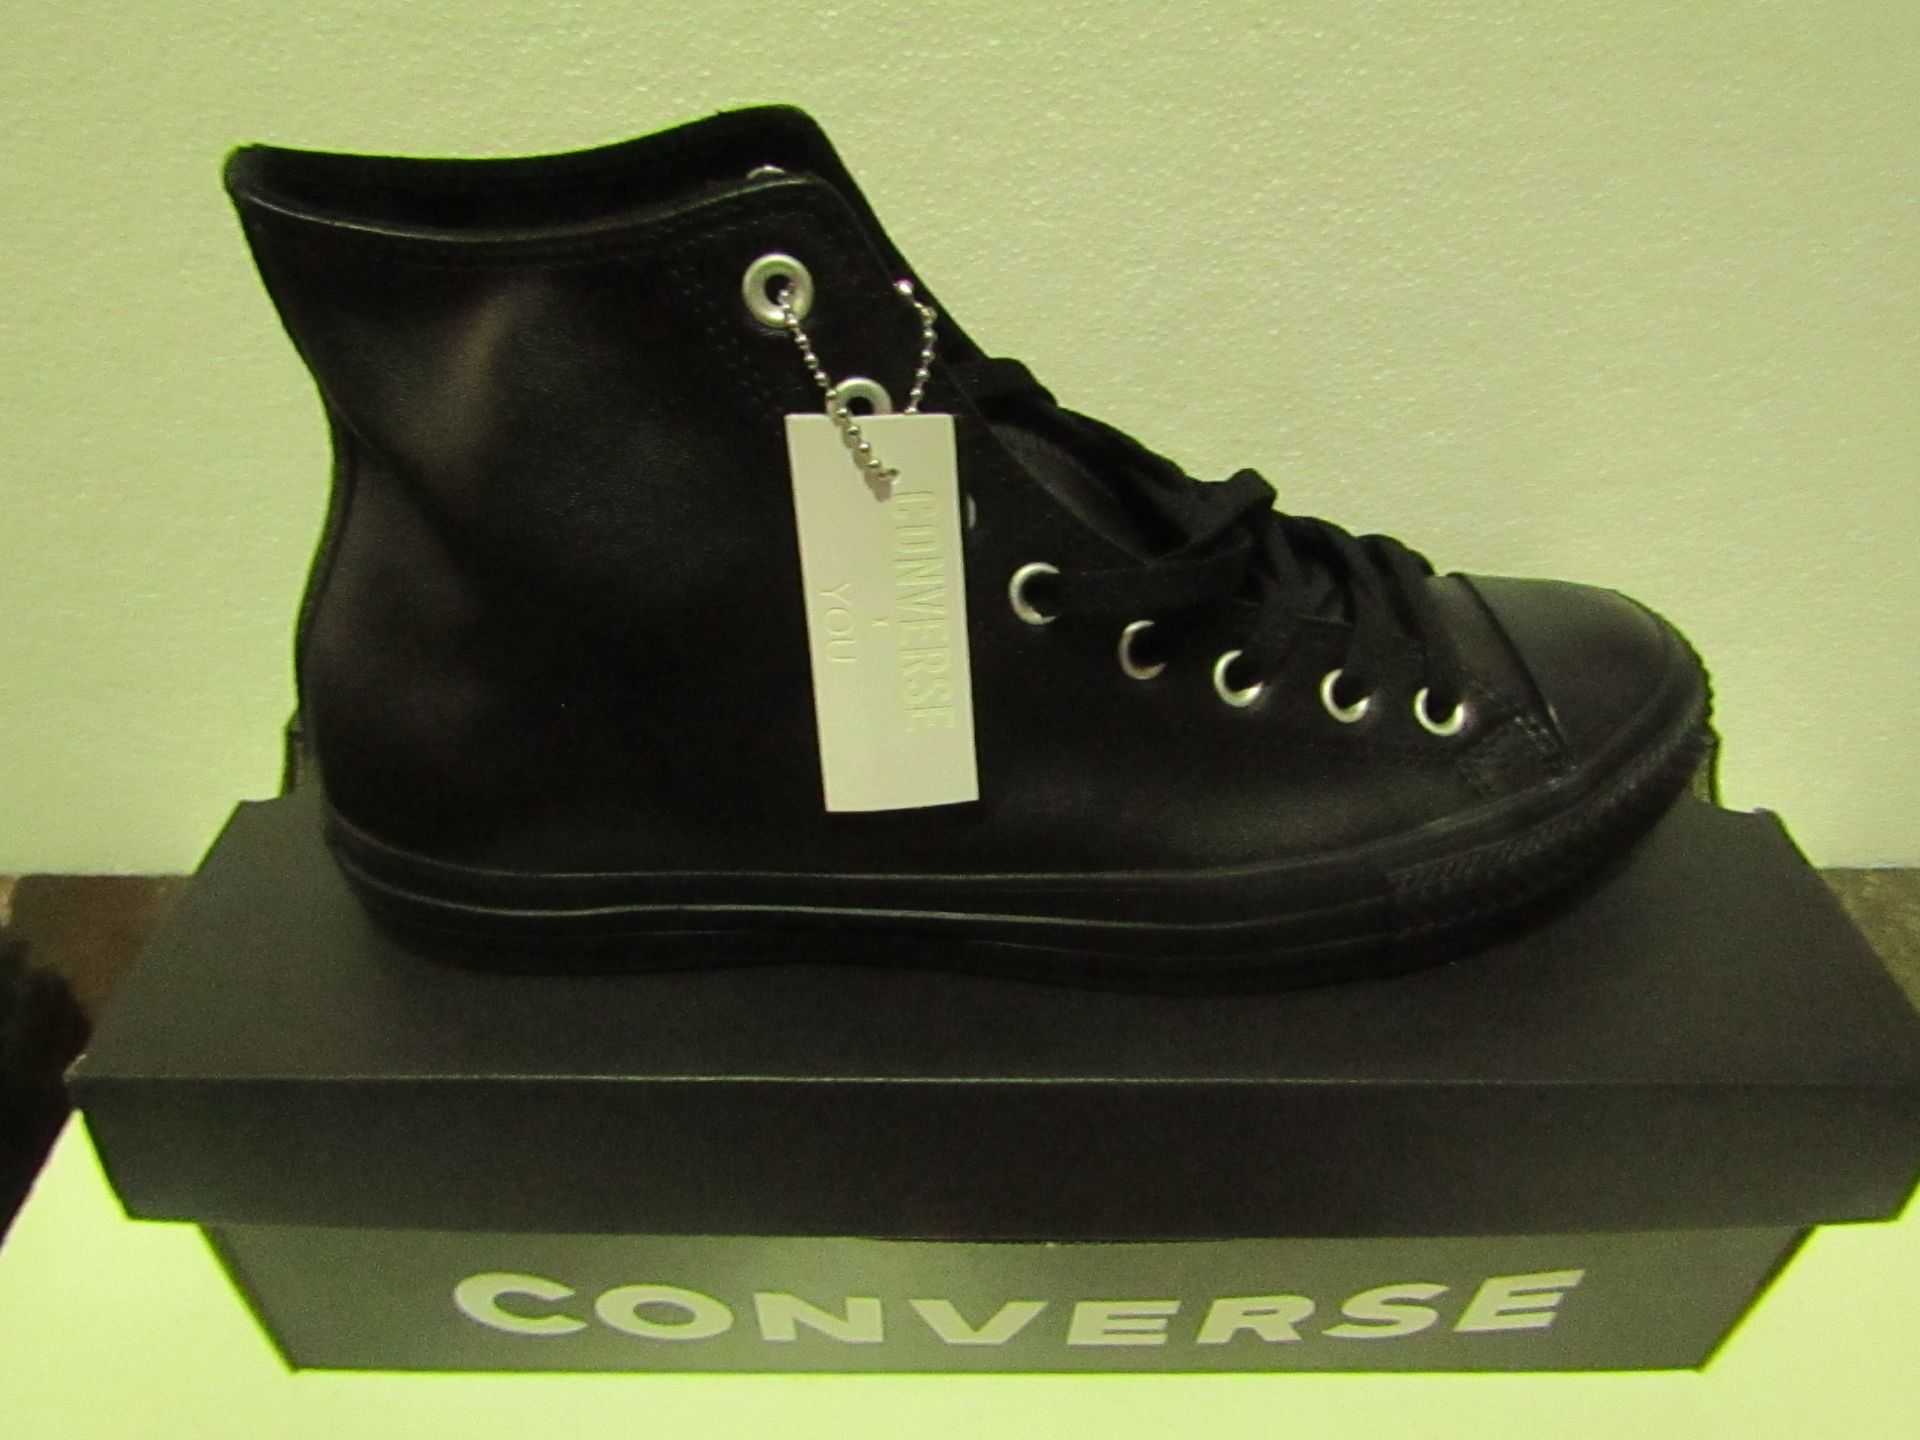 Converse All Star Black I You High Top Trainer size UK 11 new & boxed see image for design